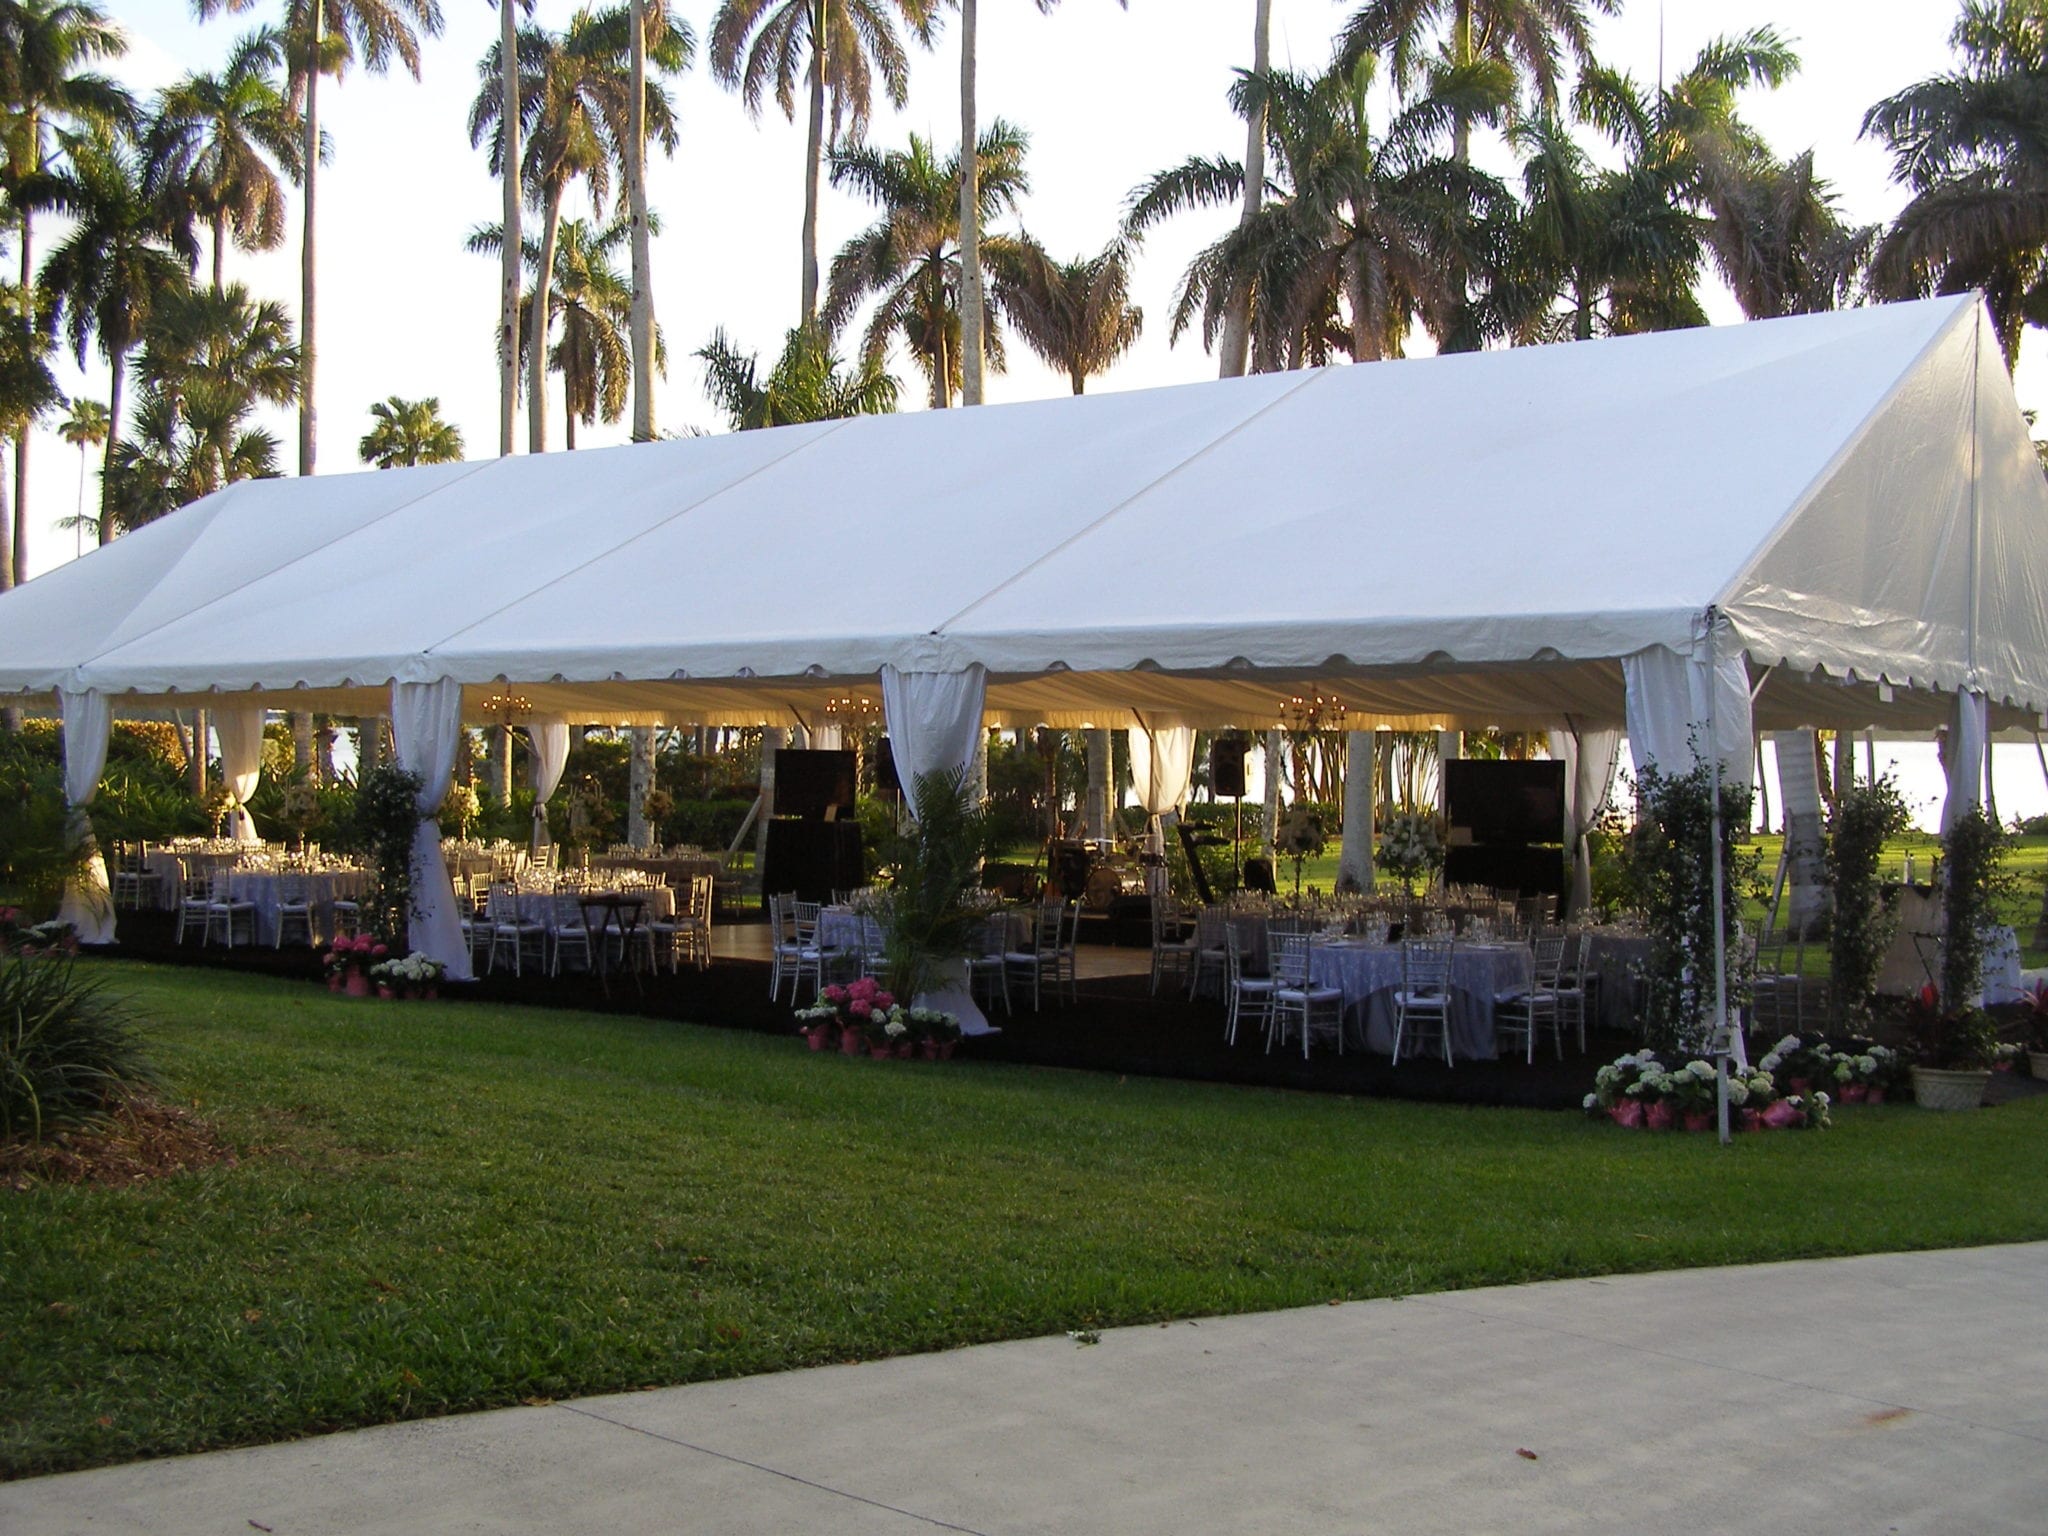 A large variety of Tents